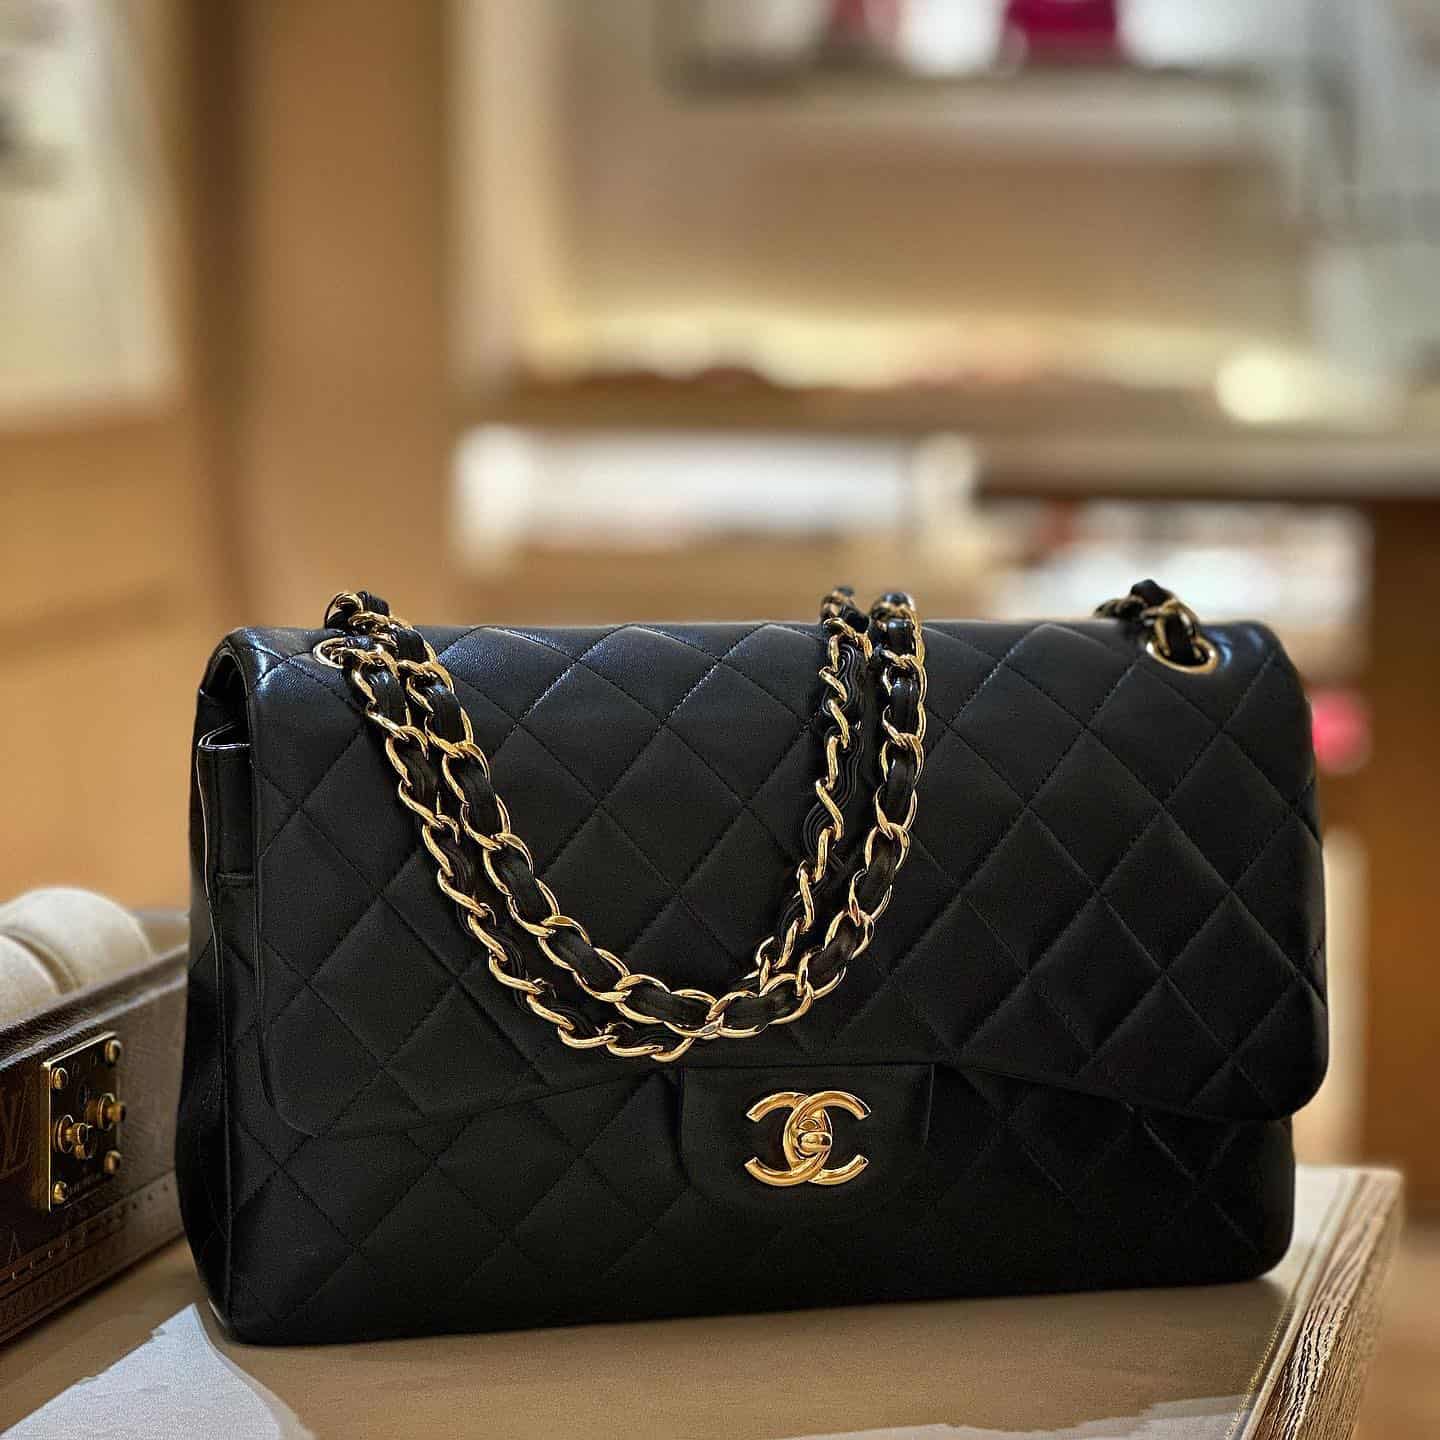 Classic Black Chanel bag investment piece